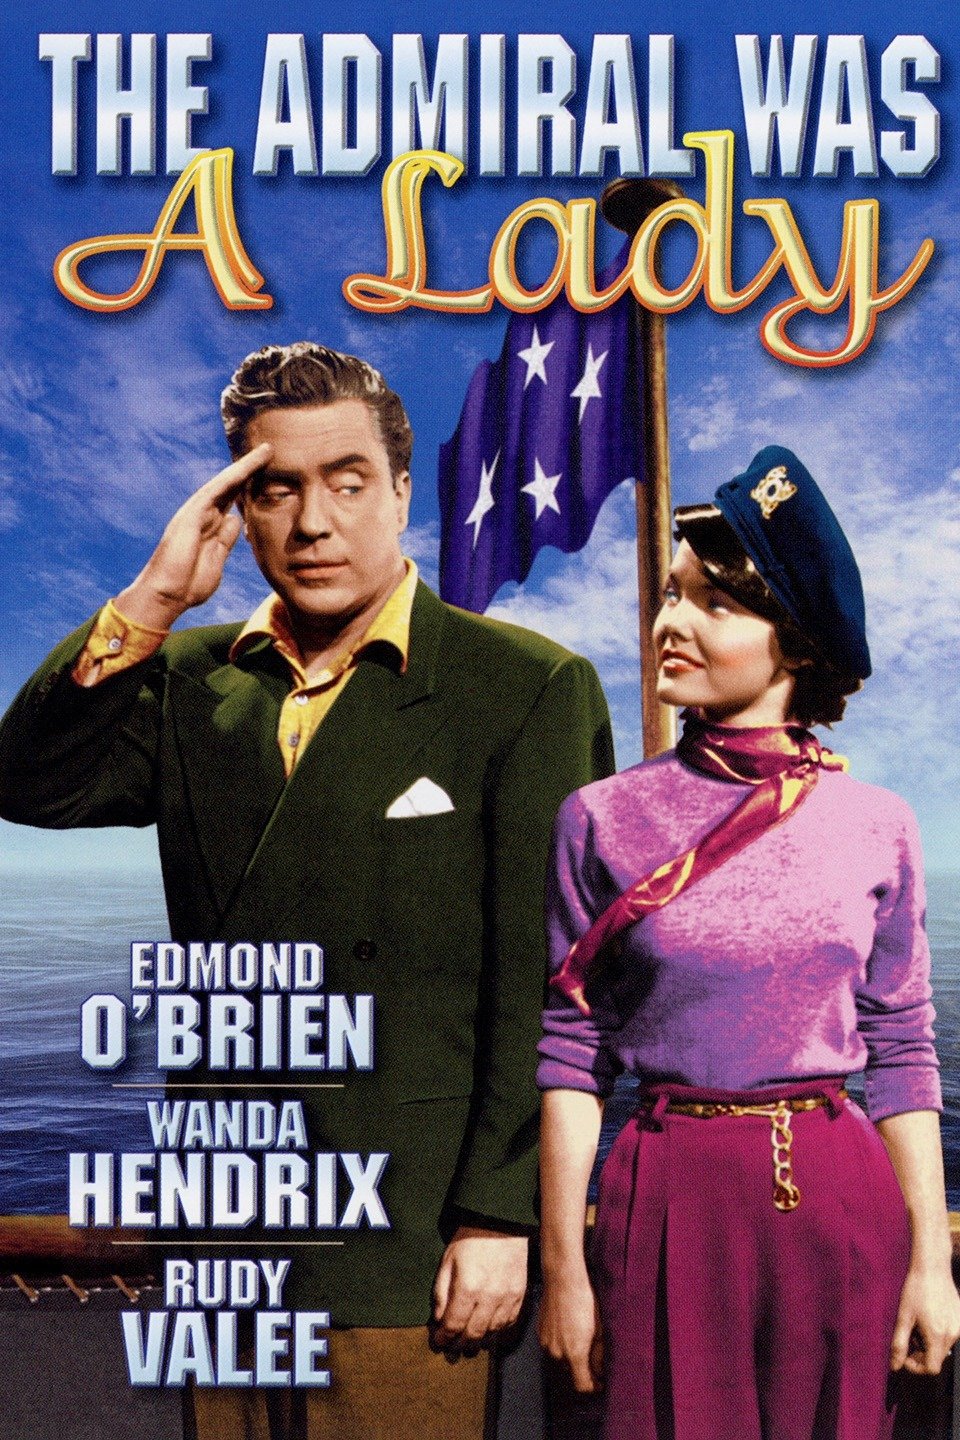 THE ADMIRAL WAS A LADY (1950)